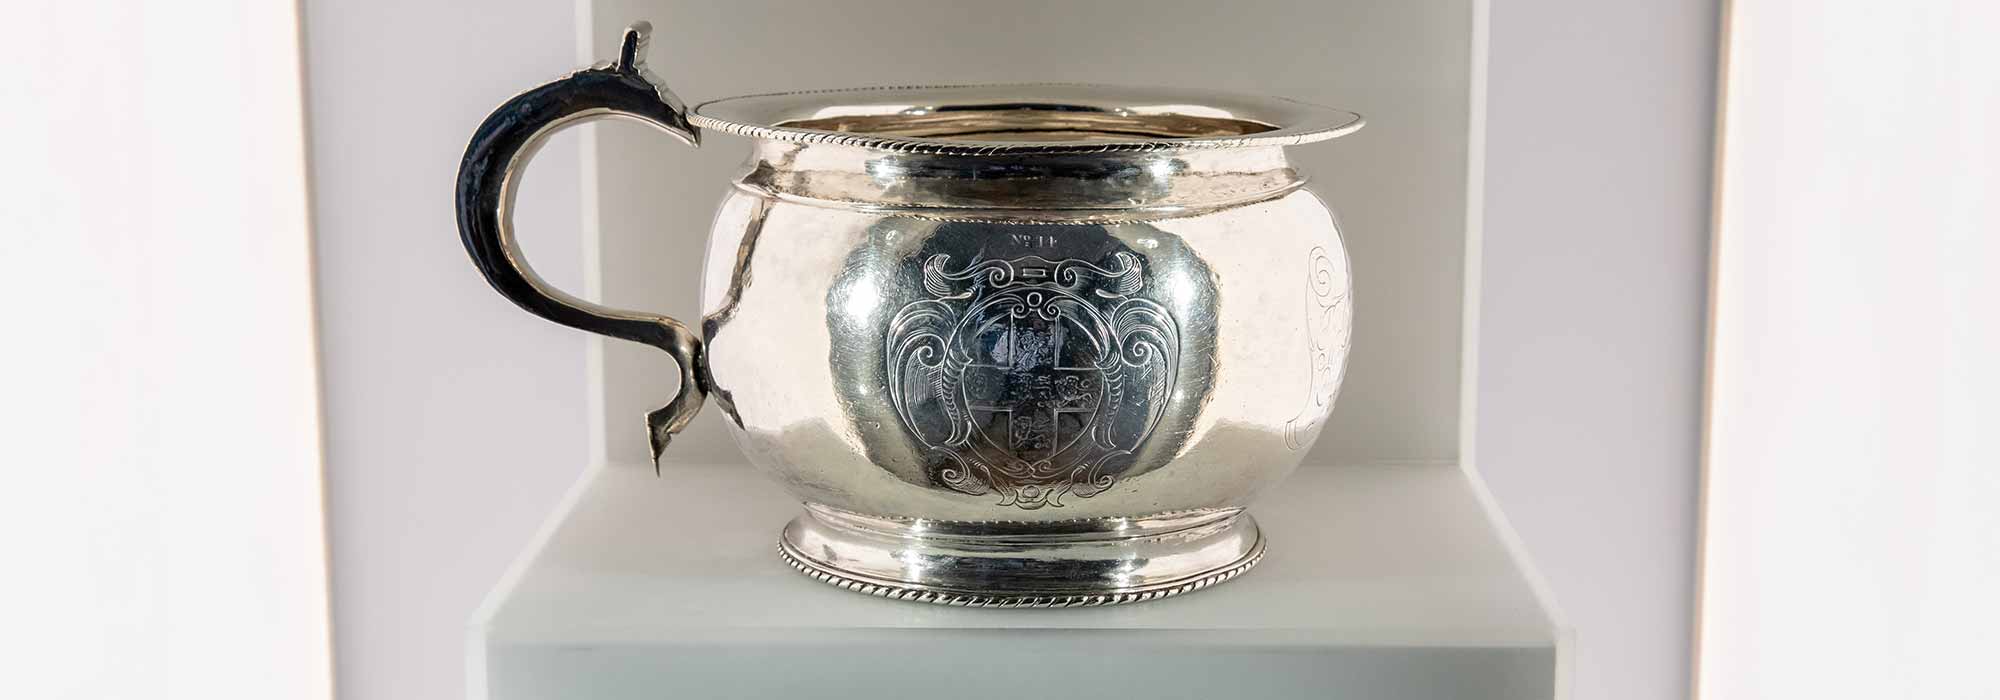 Silver chamber pot which is part of the collection.